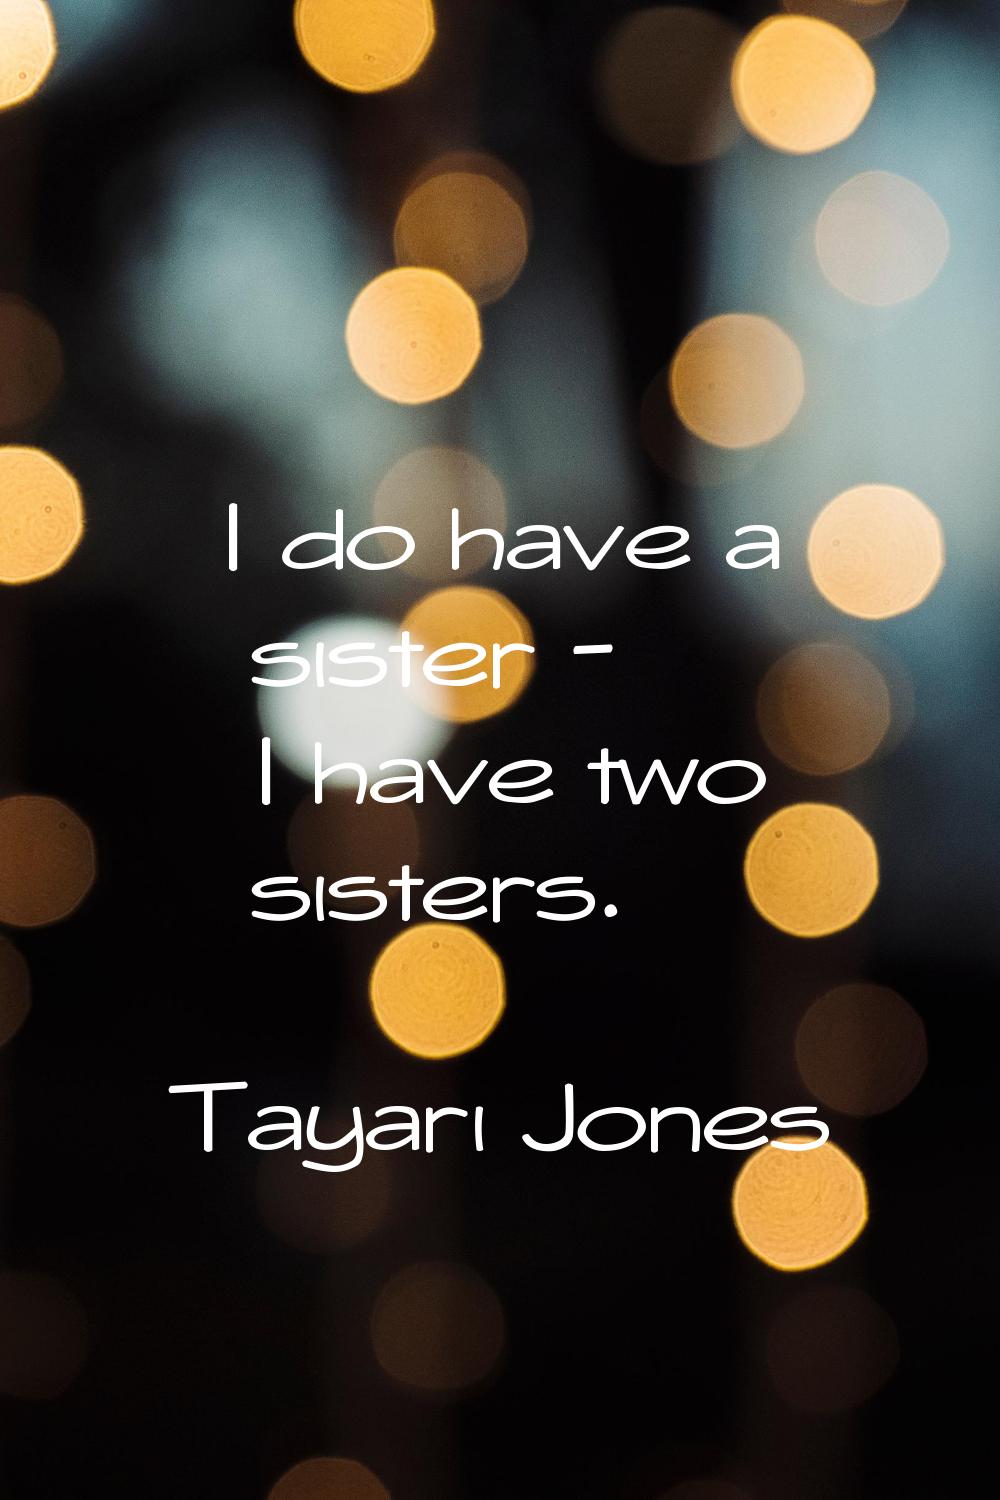 I do have a sister - I have two sisters.